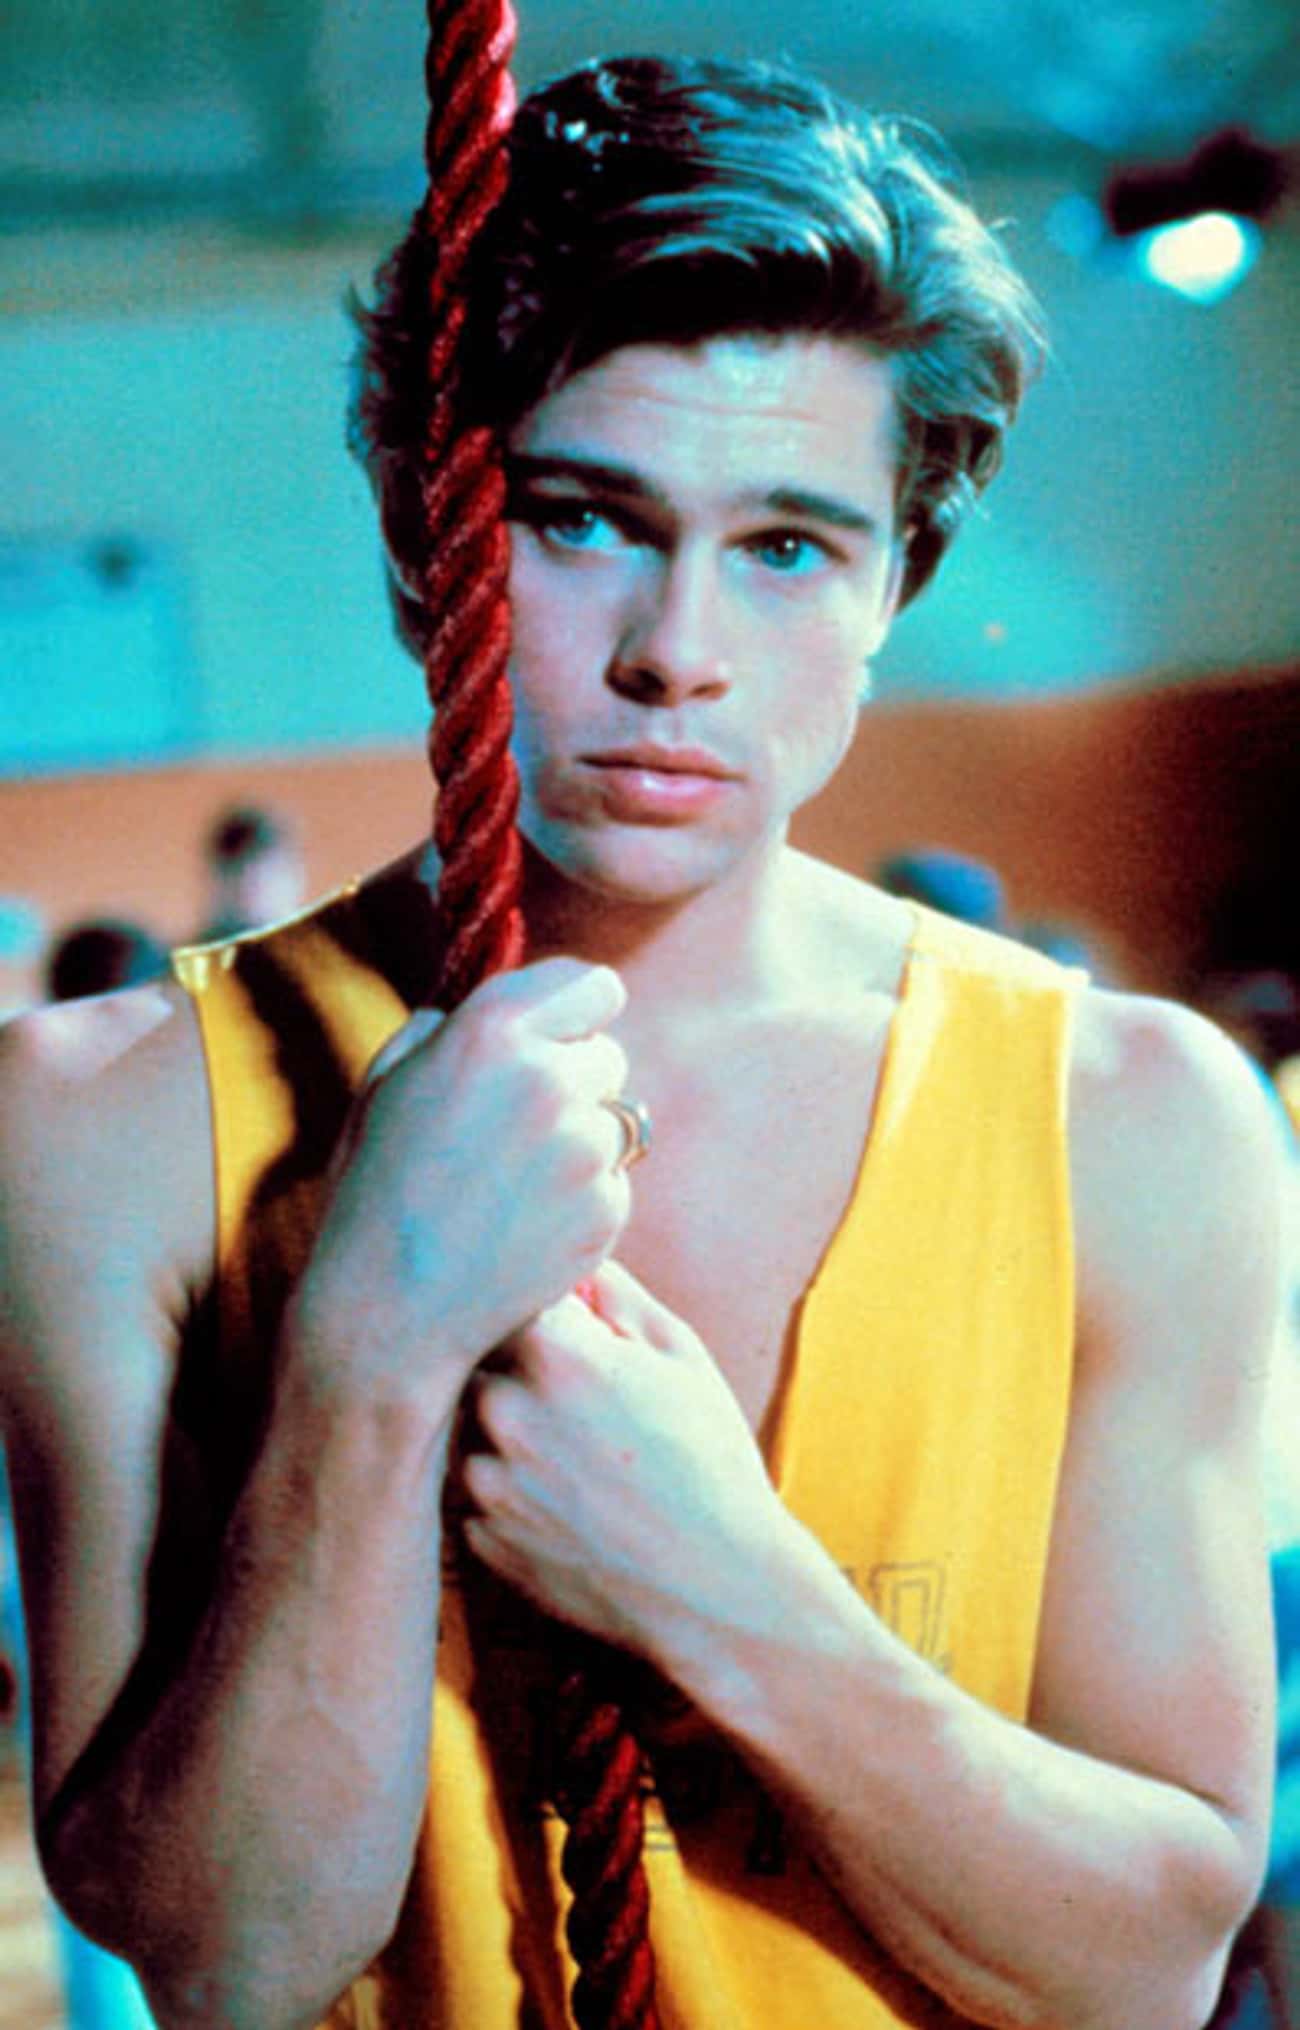 A Younger Brad Pitt Really Hates Climbing the Rope in Gym Class. Stars: They're Just Like Us!